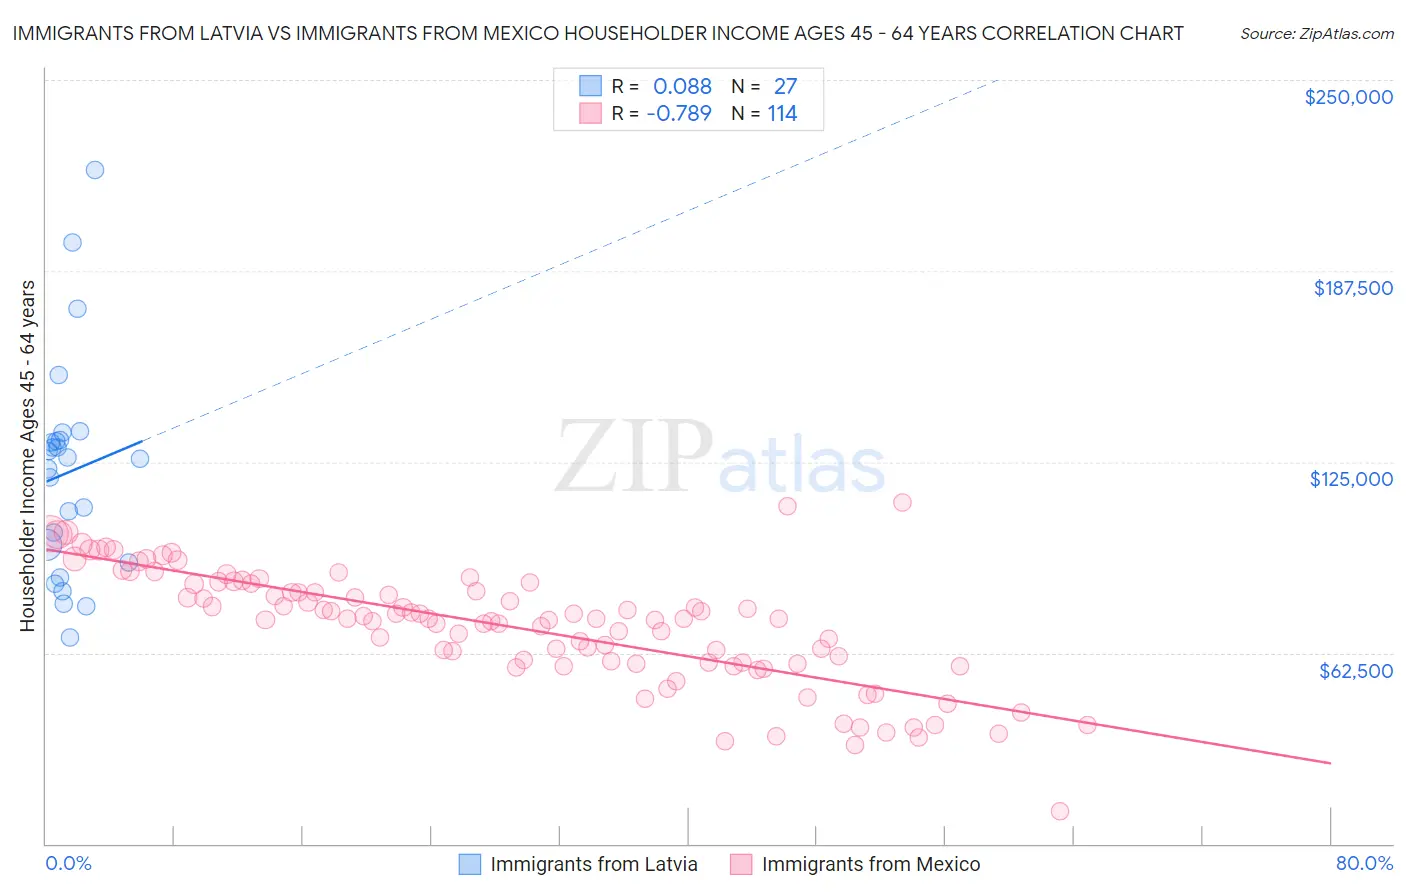 Immigrants from Latvia vs Immigrants from Mexico Householder Income Ages 45 - 64 years